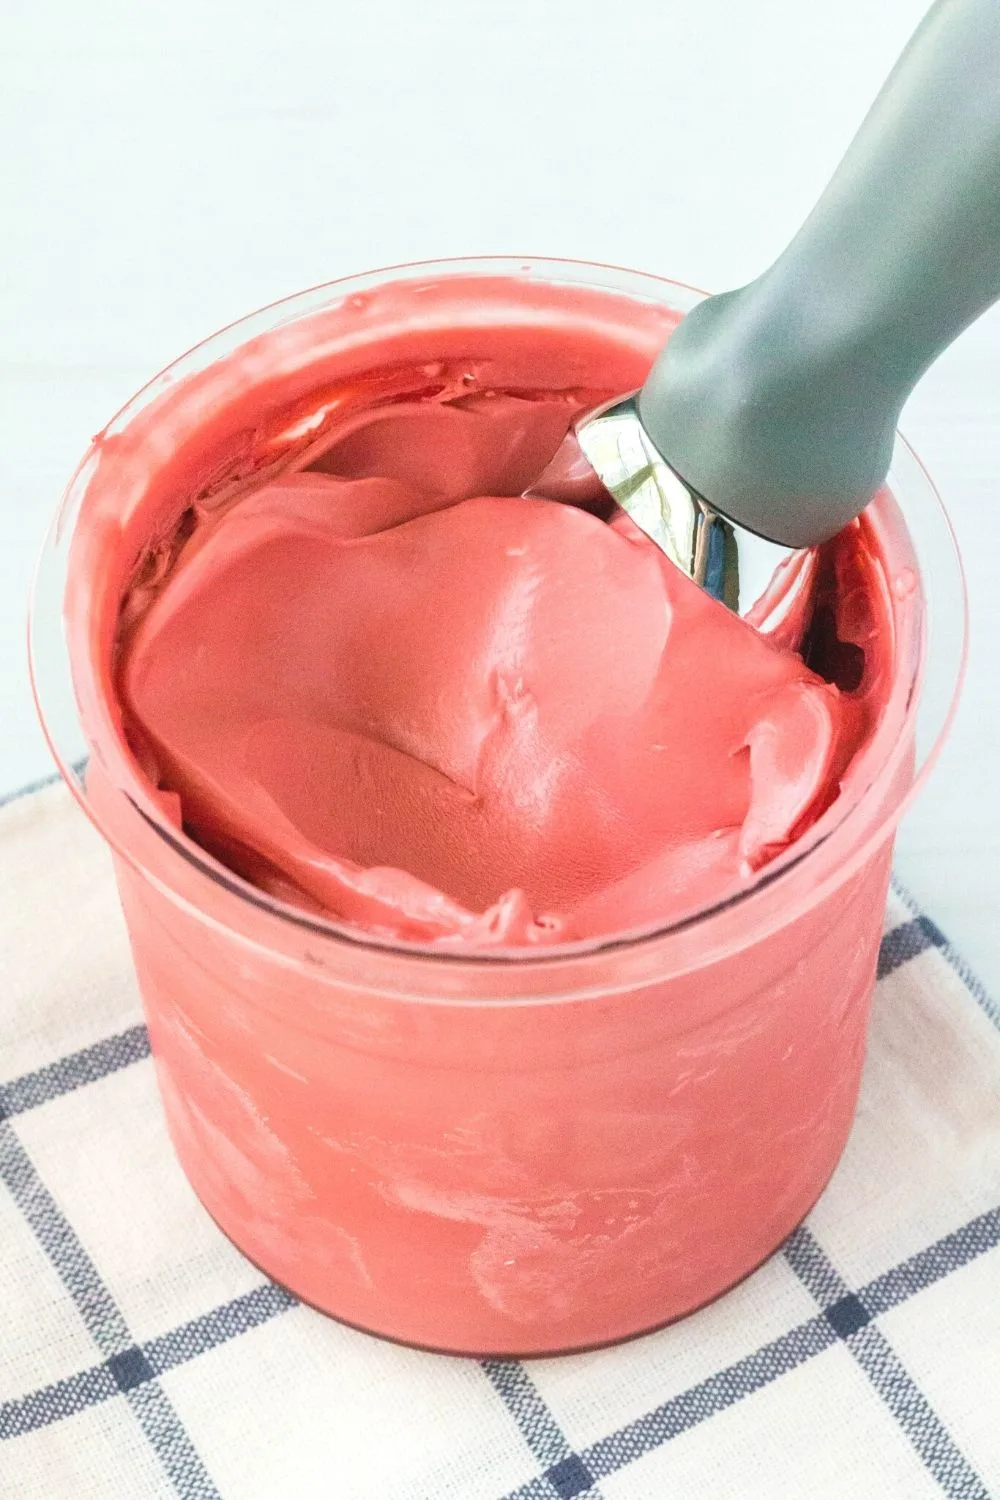 close-up view of a Ninja Creami pint filled with red velvet cake batter ice cream. An ice cream scoop is swirling the top of the ice cream.